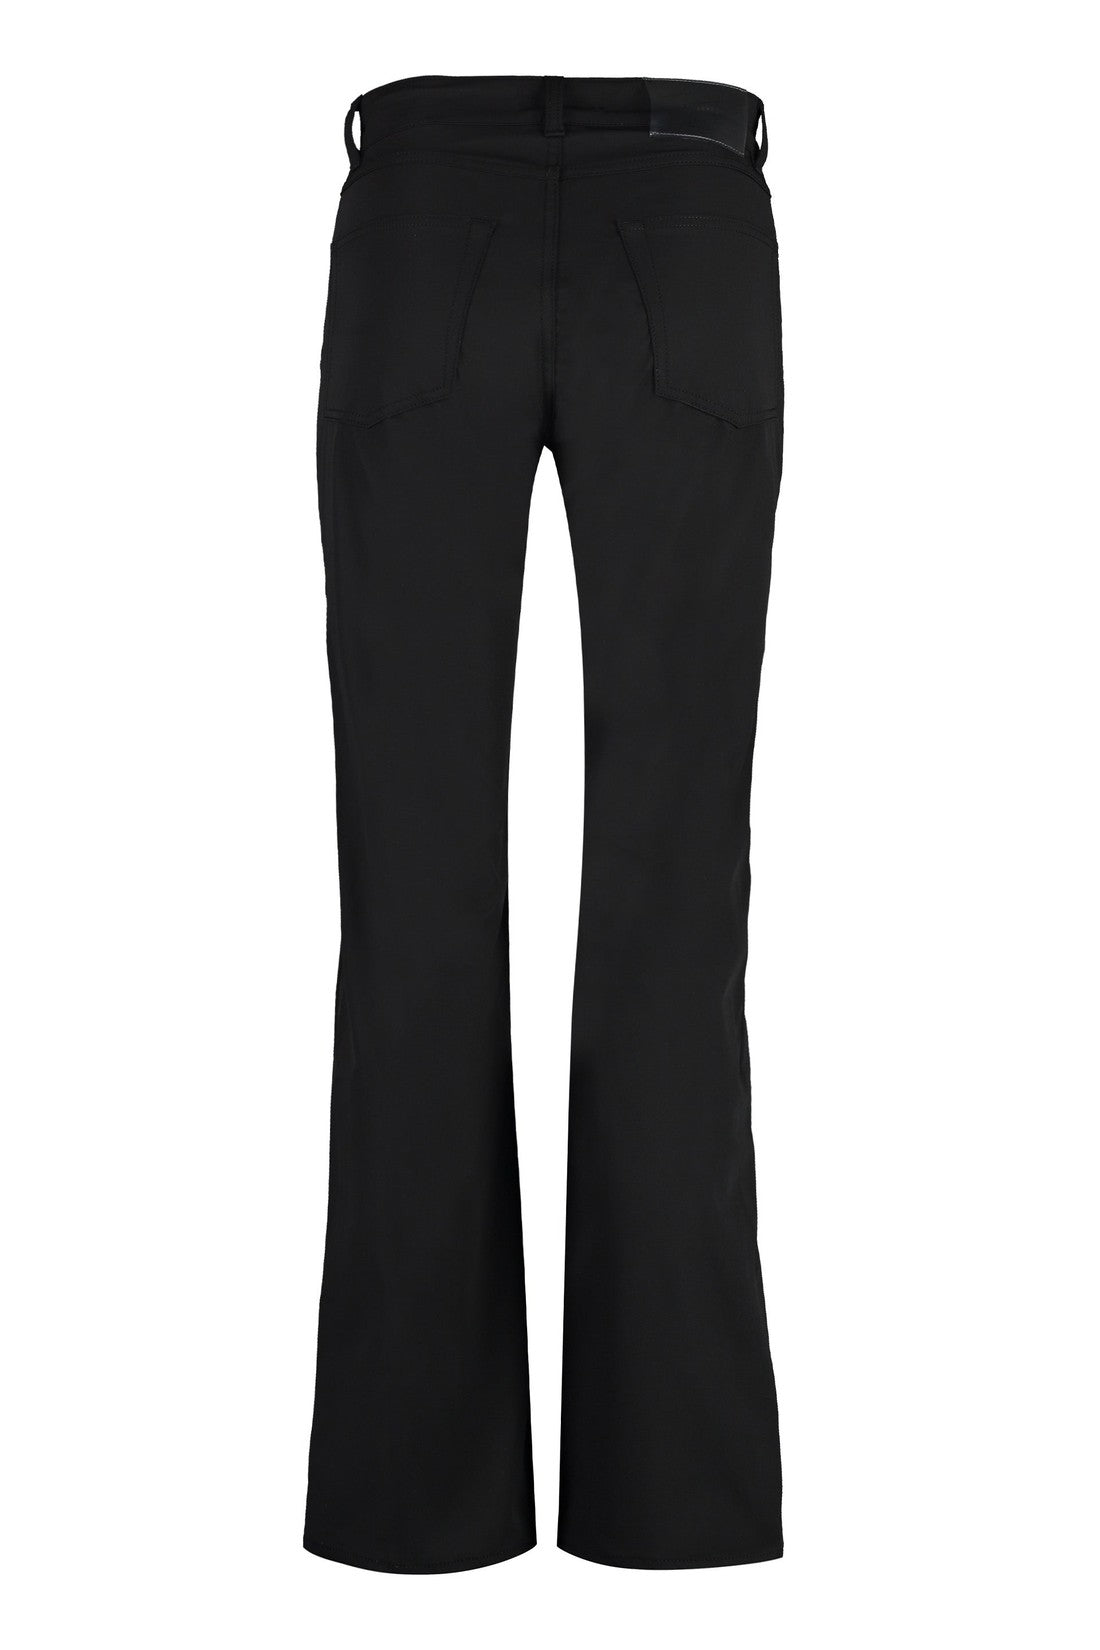 Our Legacy-OUTLET-SALE-Flared cotton trousers-ARCHIVIST